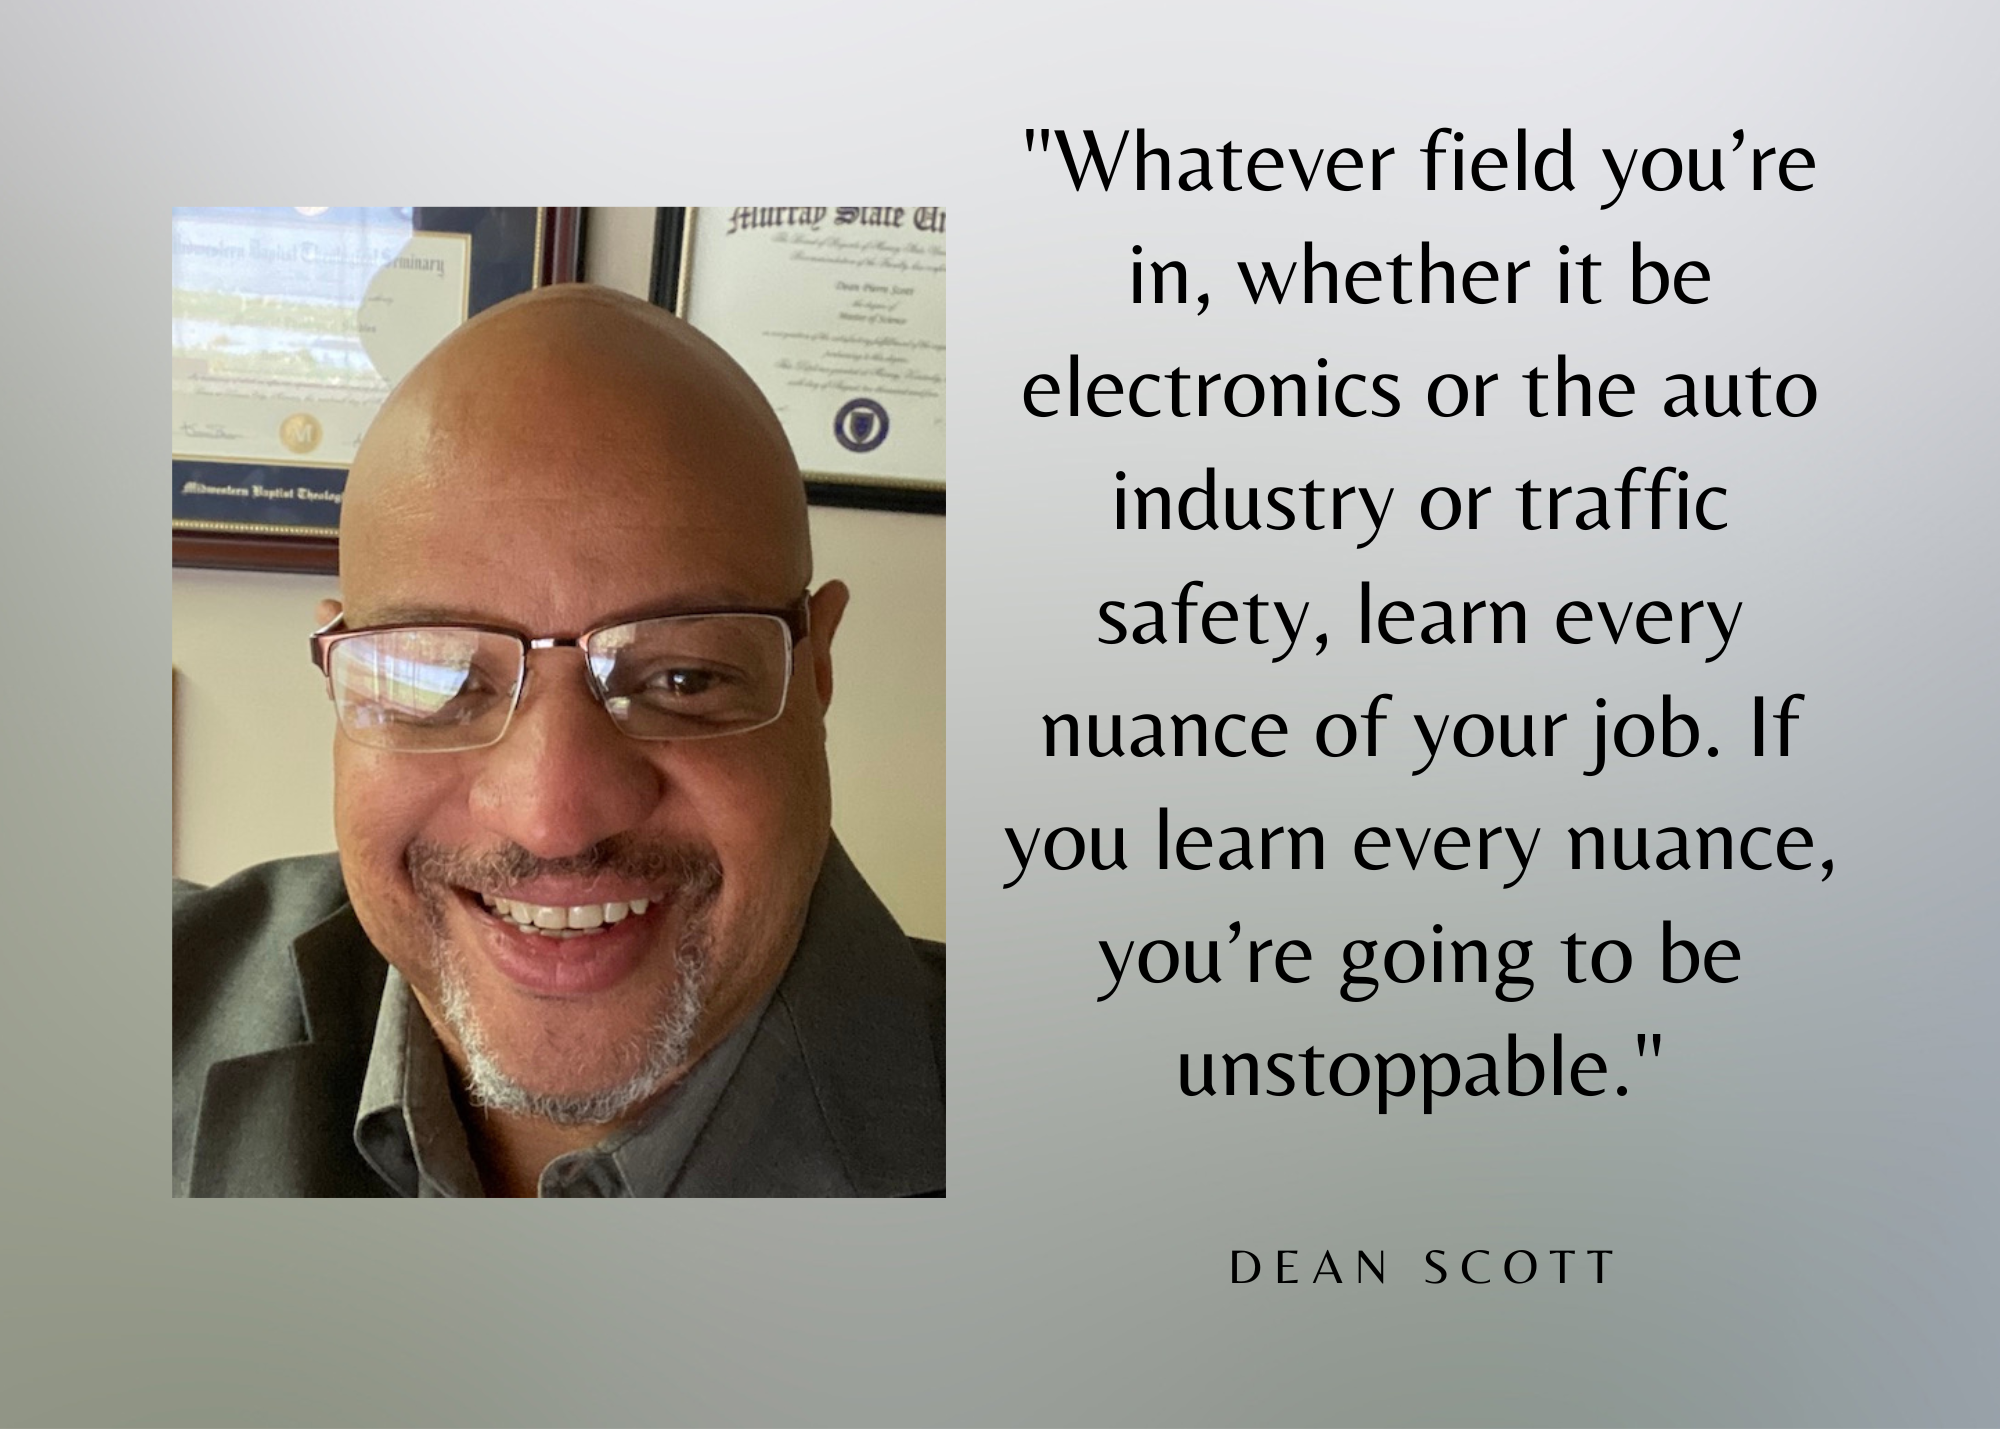 Dean Scott is Featured in a New Professional Profile